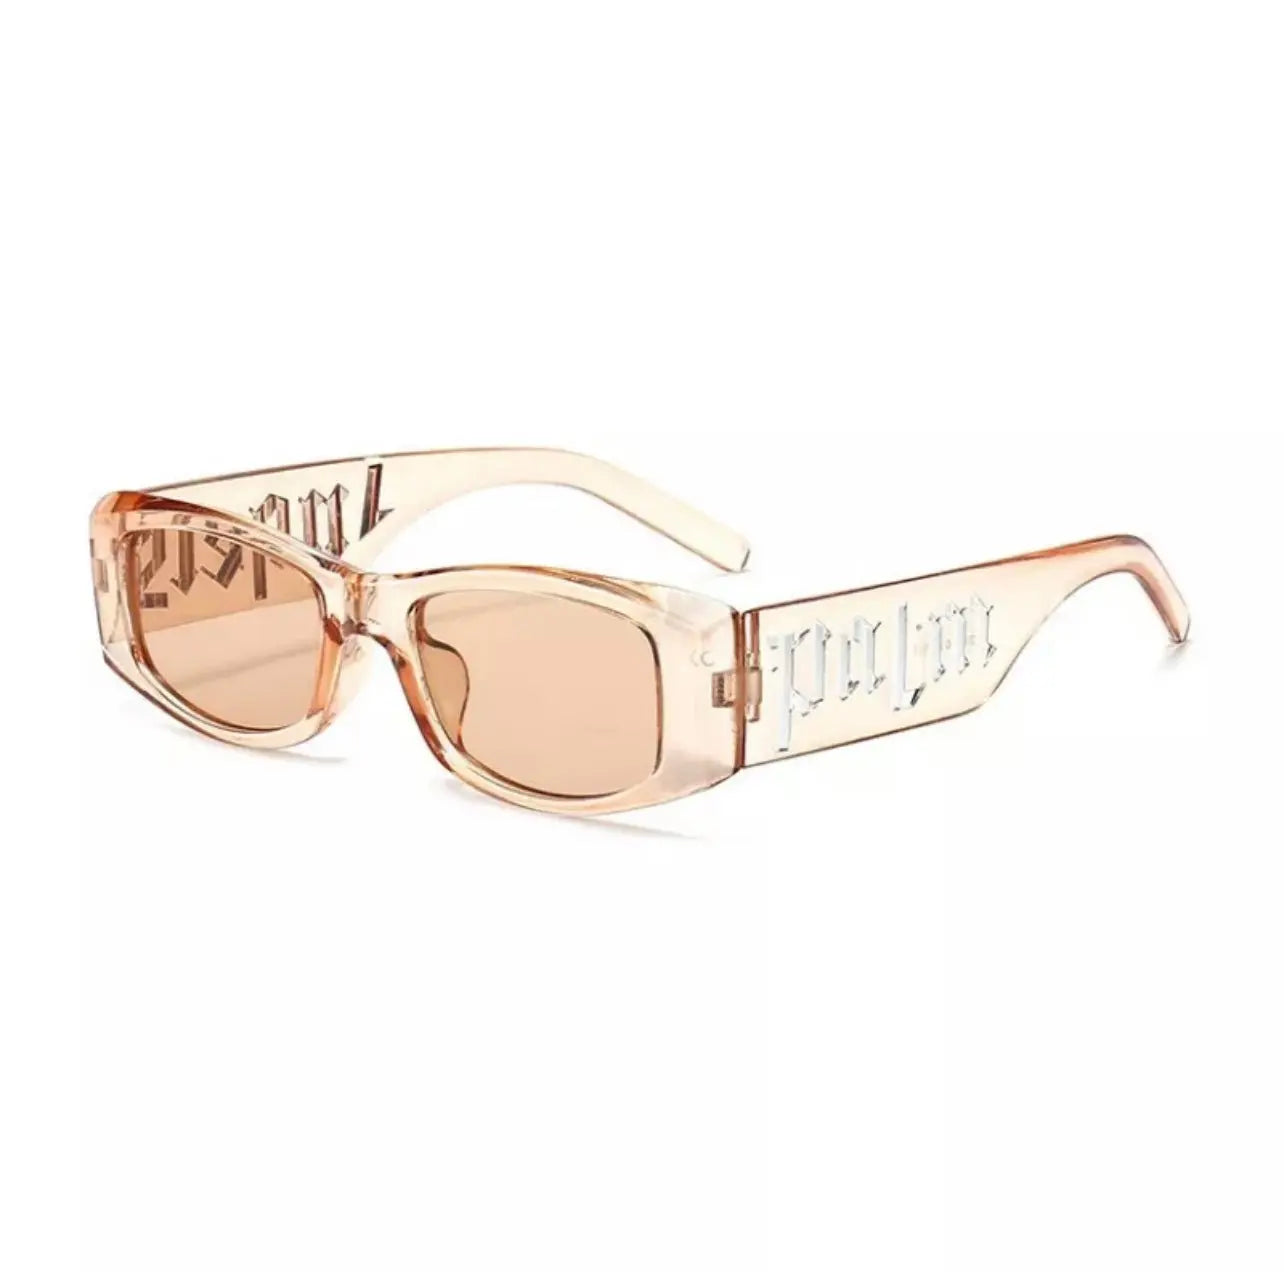 a pair of palm angels sunglasses with the word'palm'on them.